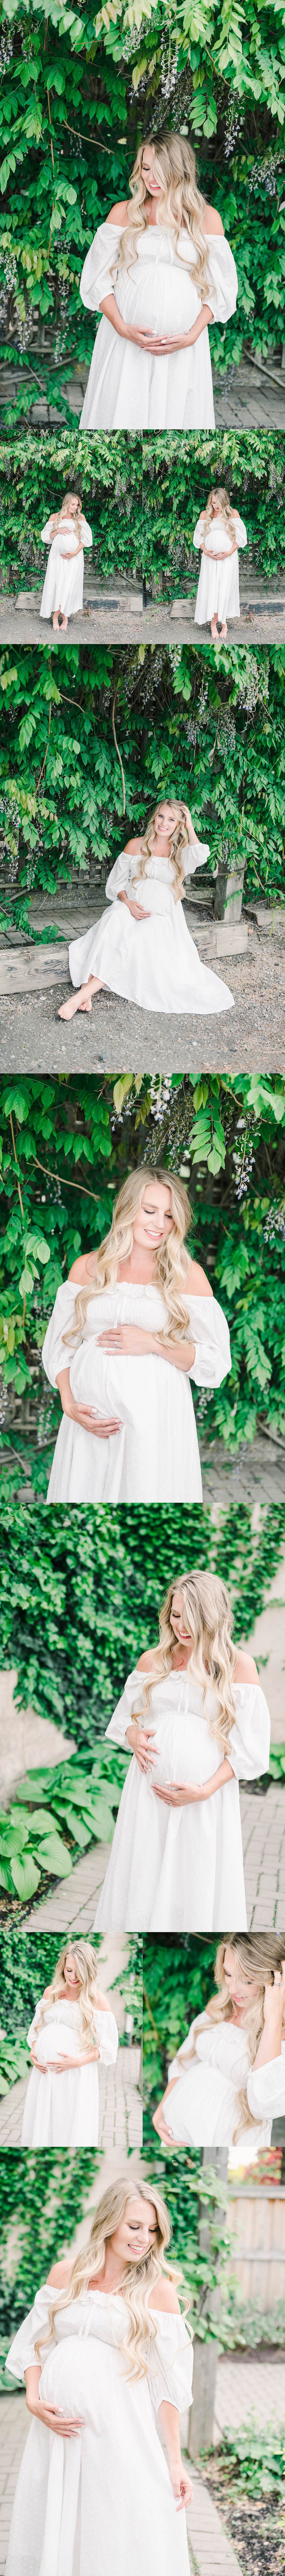 maternity session in historic village and wisteria blooms